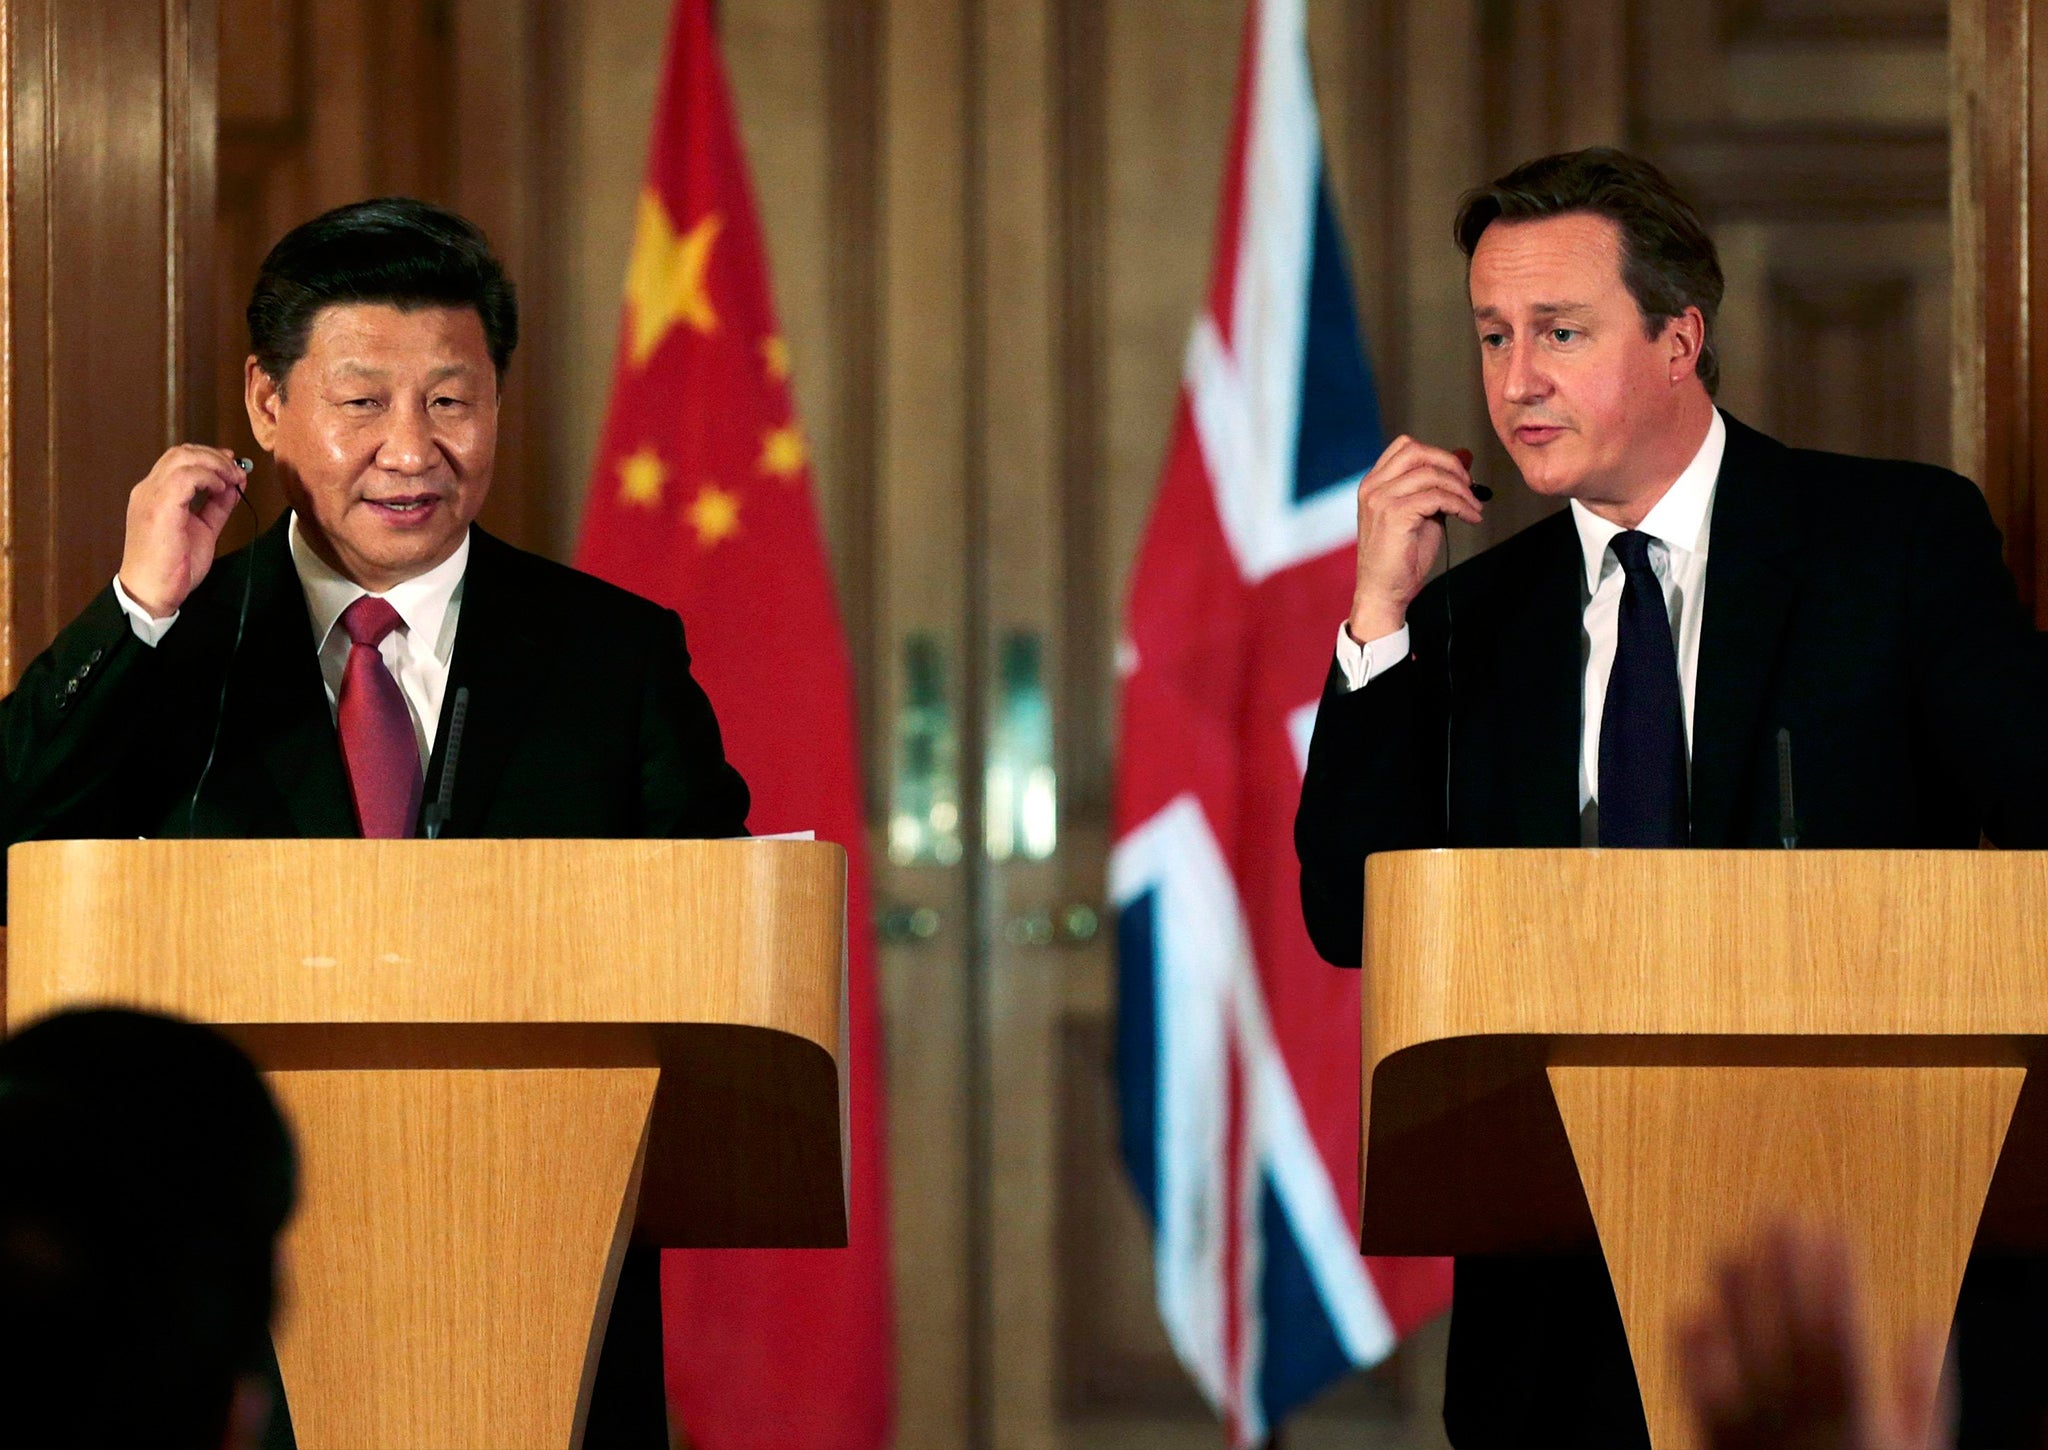 Xi Jinping and David Cameron attend a joint press conference in 10 Downing Street